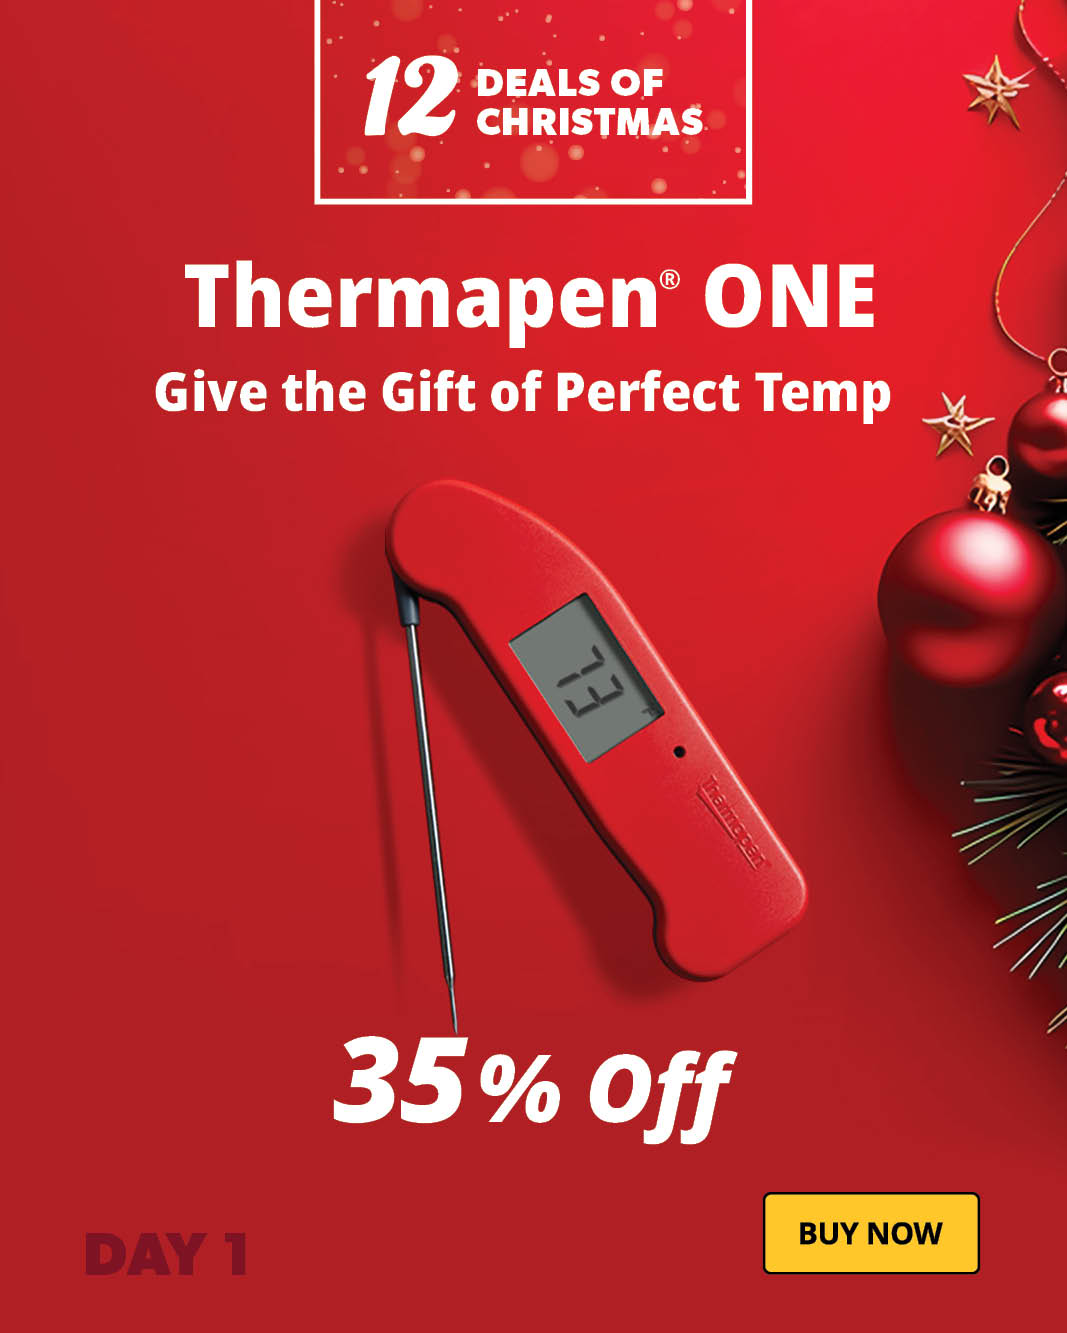 Thermoworks Thermapen One RED Color Model THS-235-477, was 99$ - SALE OFF